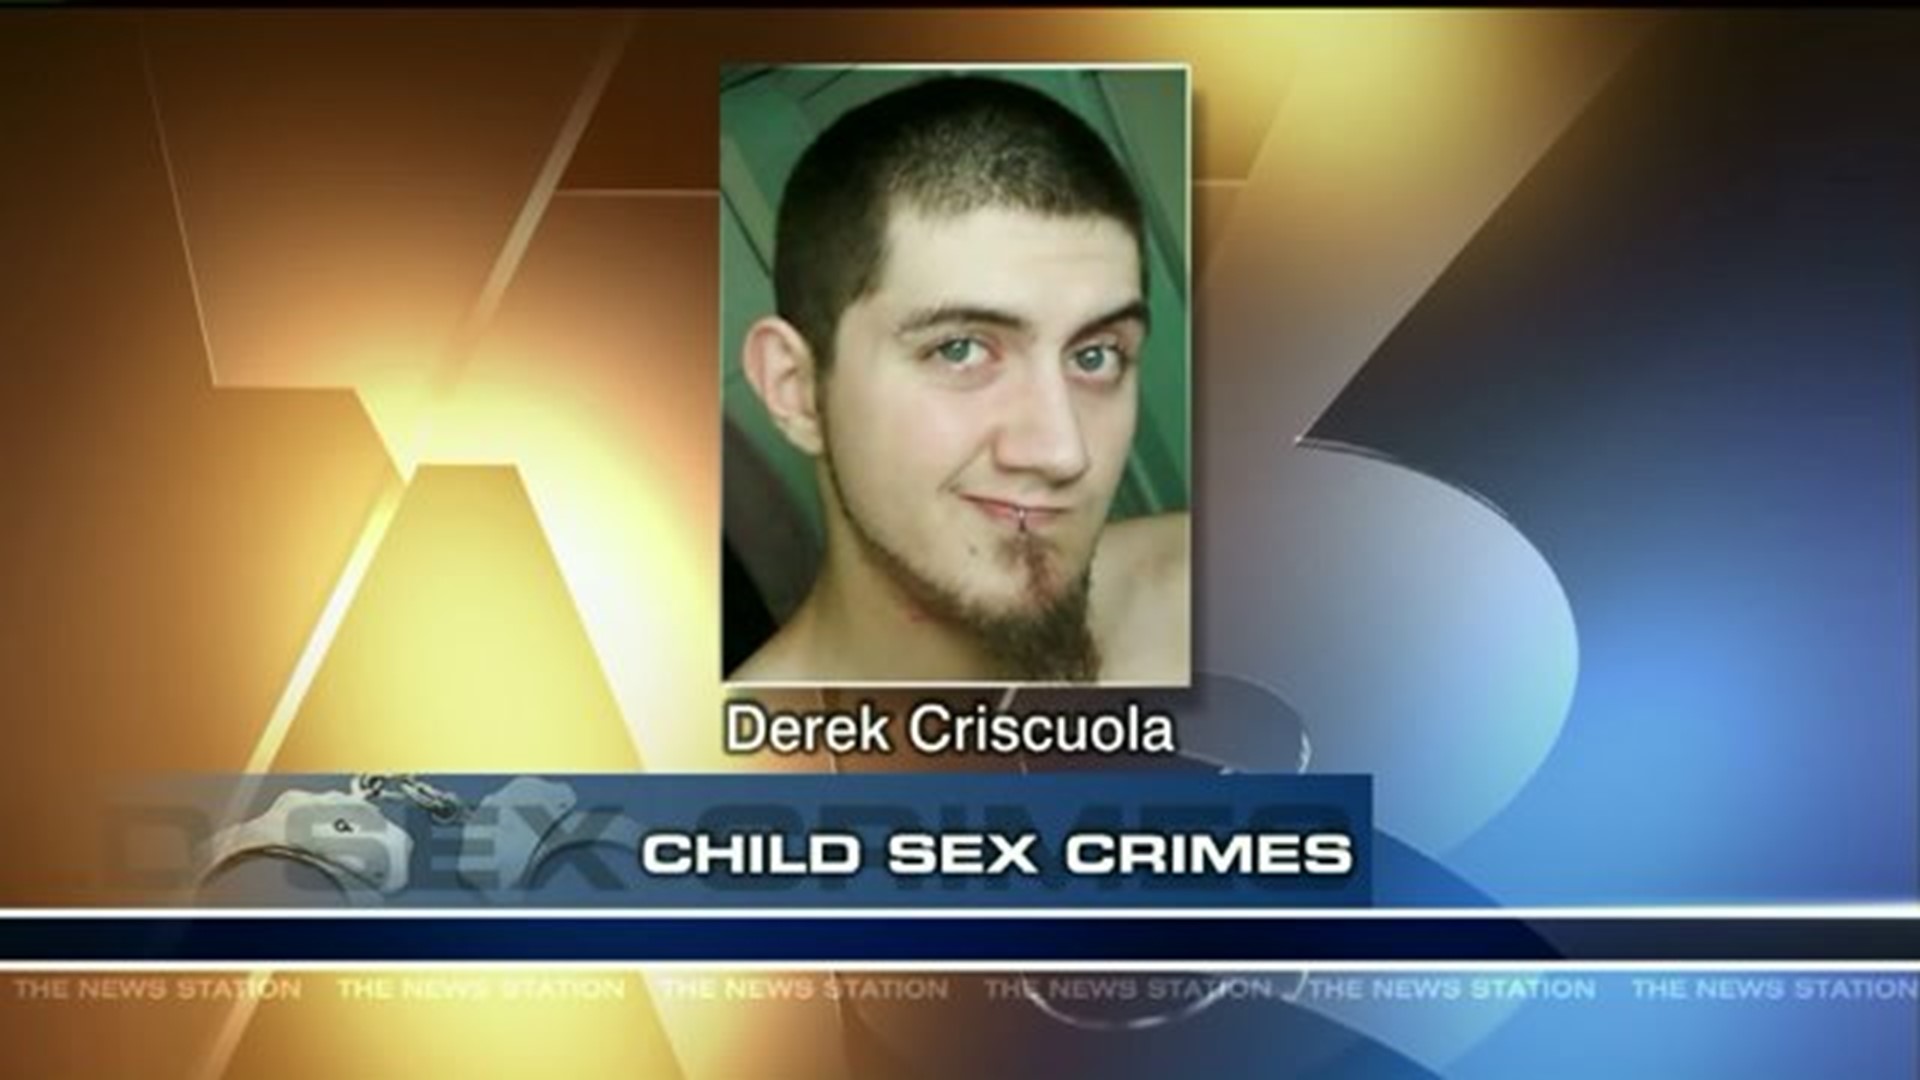 Man Locked Up on Child Sex Charges in Scranton